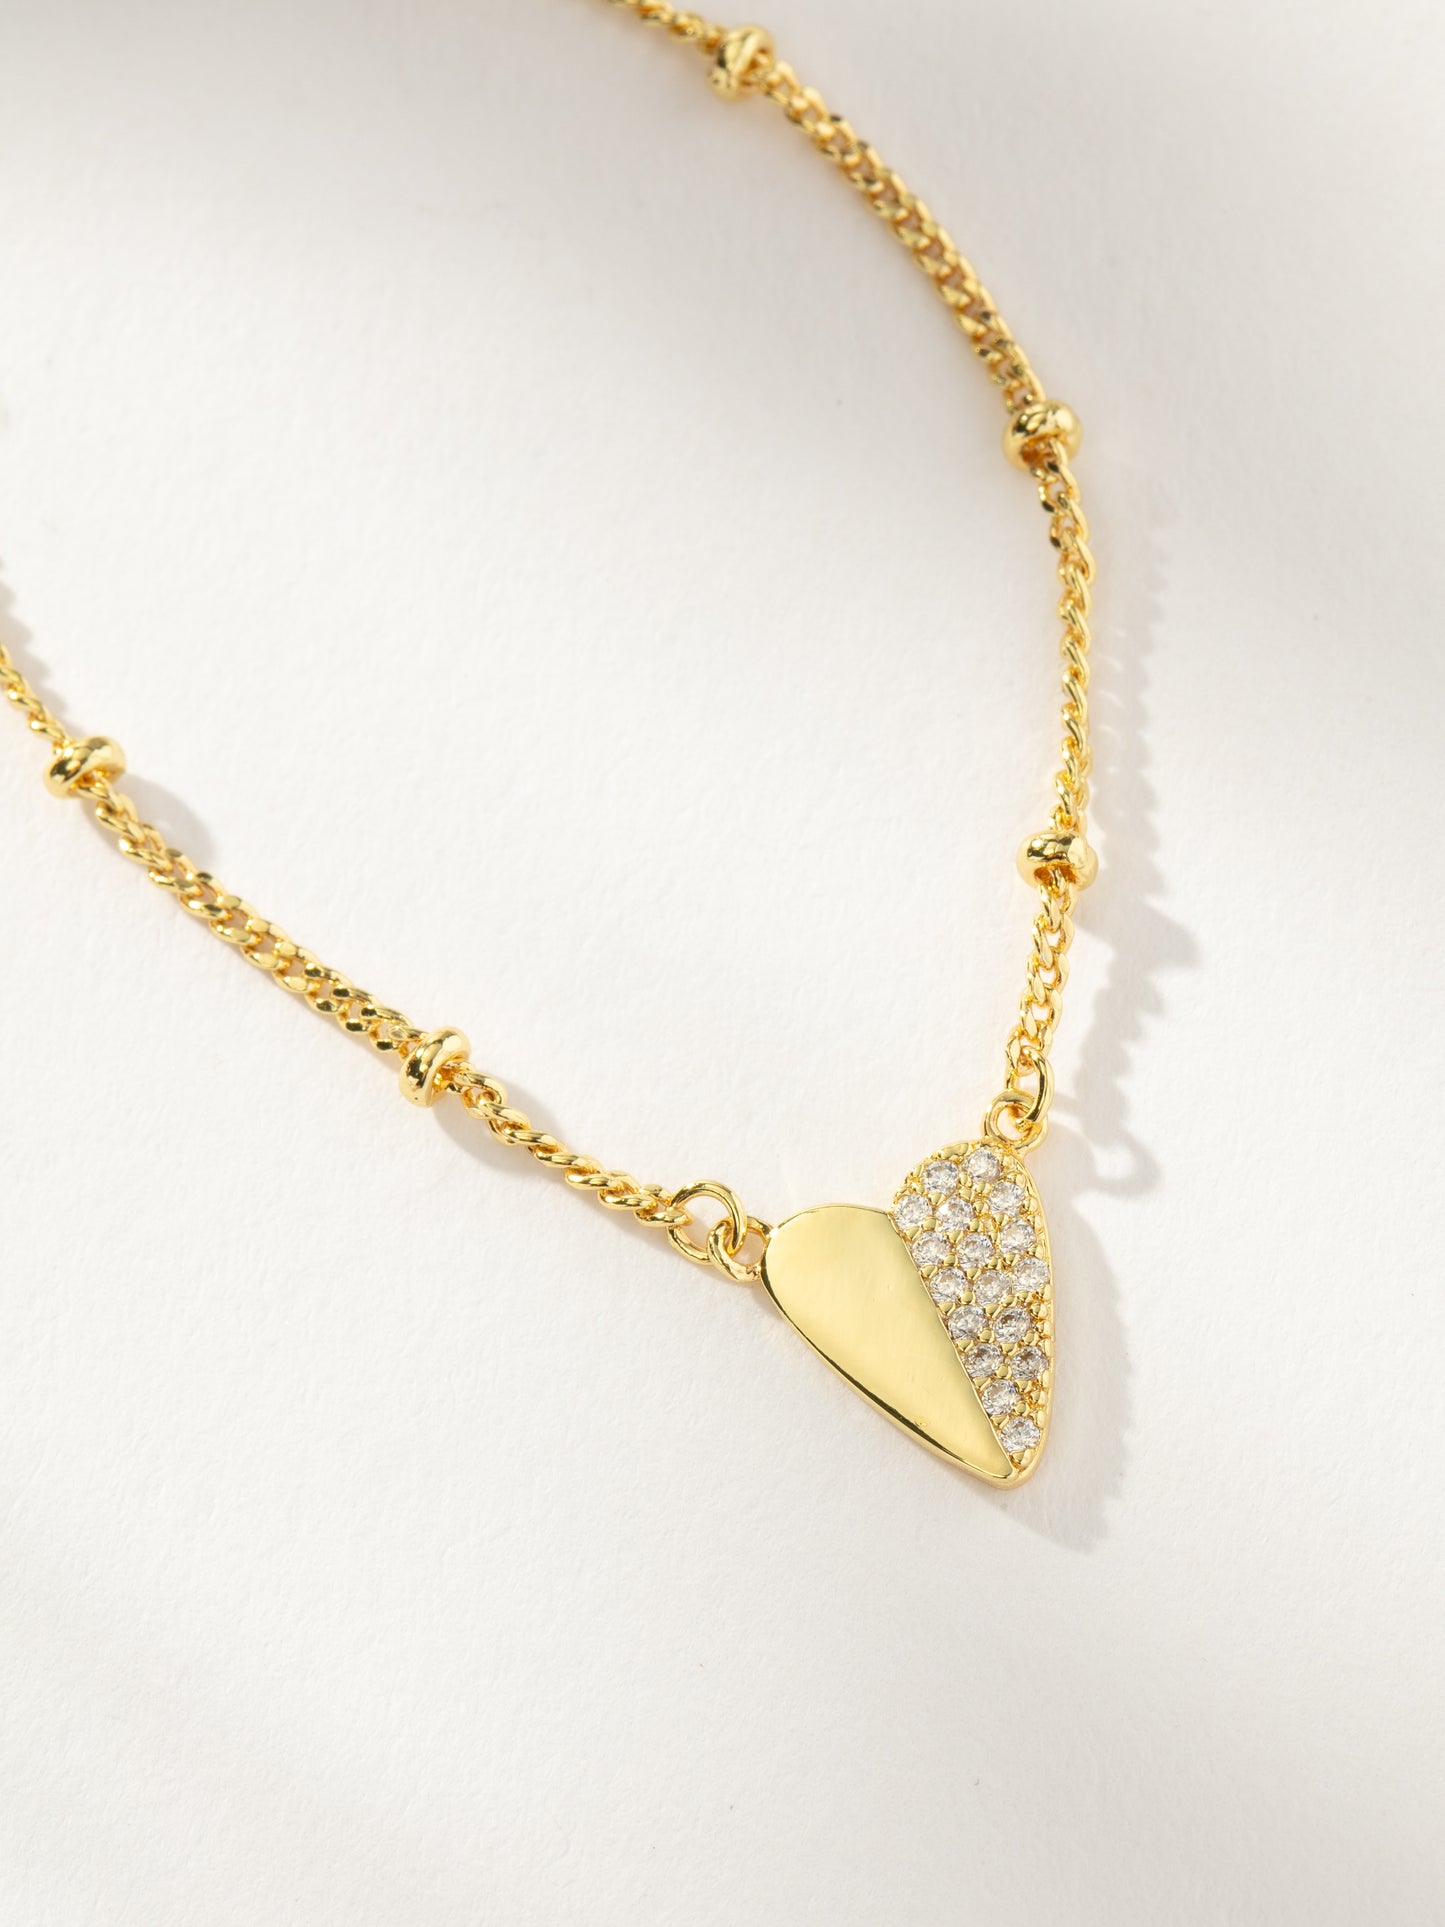 Other Half Heart Necklace | Gold | Product Detail Image | Uncommon James